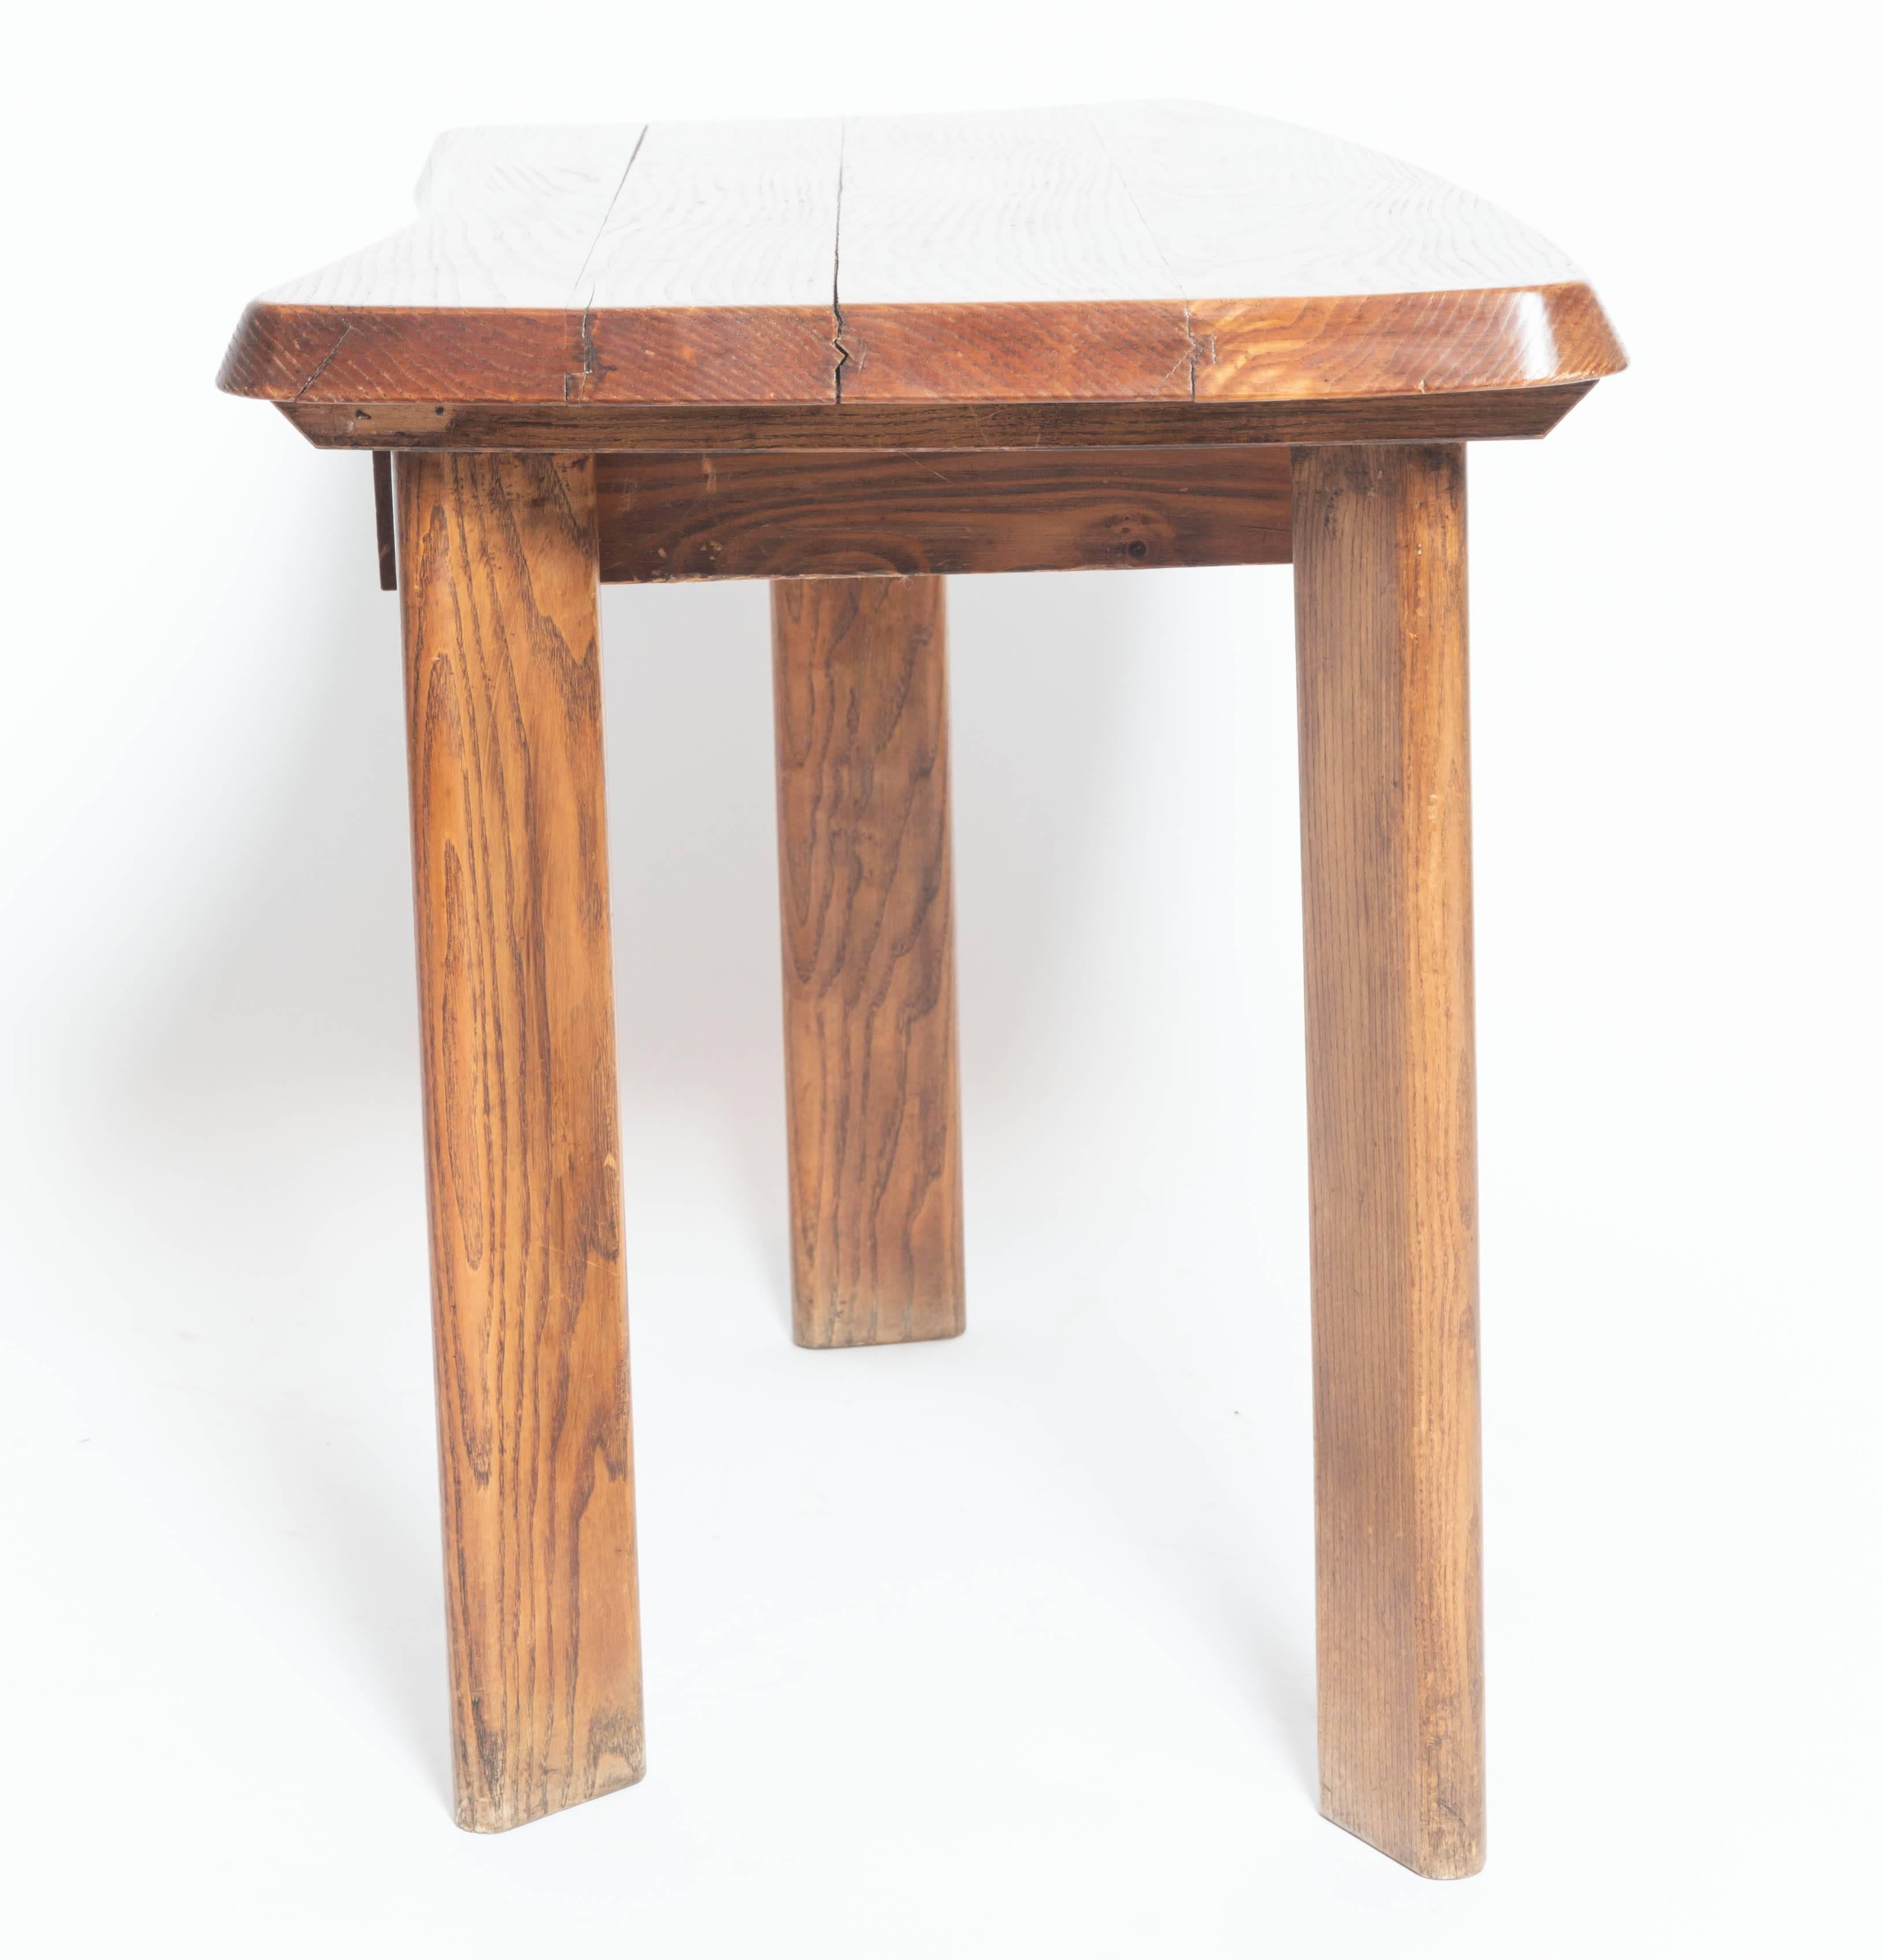 French Three-Legged Wooden Oak Table with Drawer, in the Manner of Charlotte Perriand